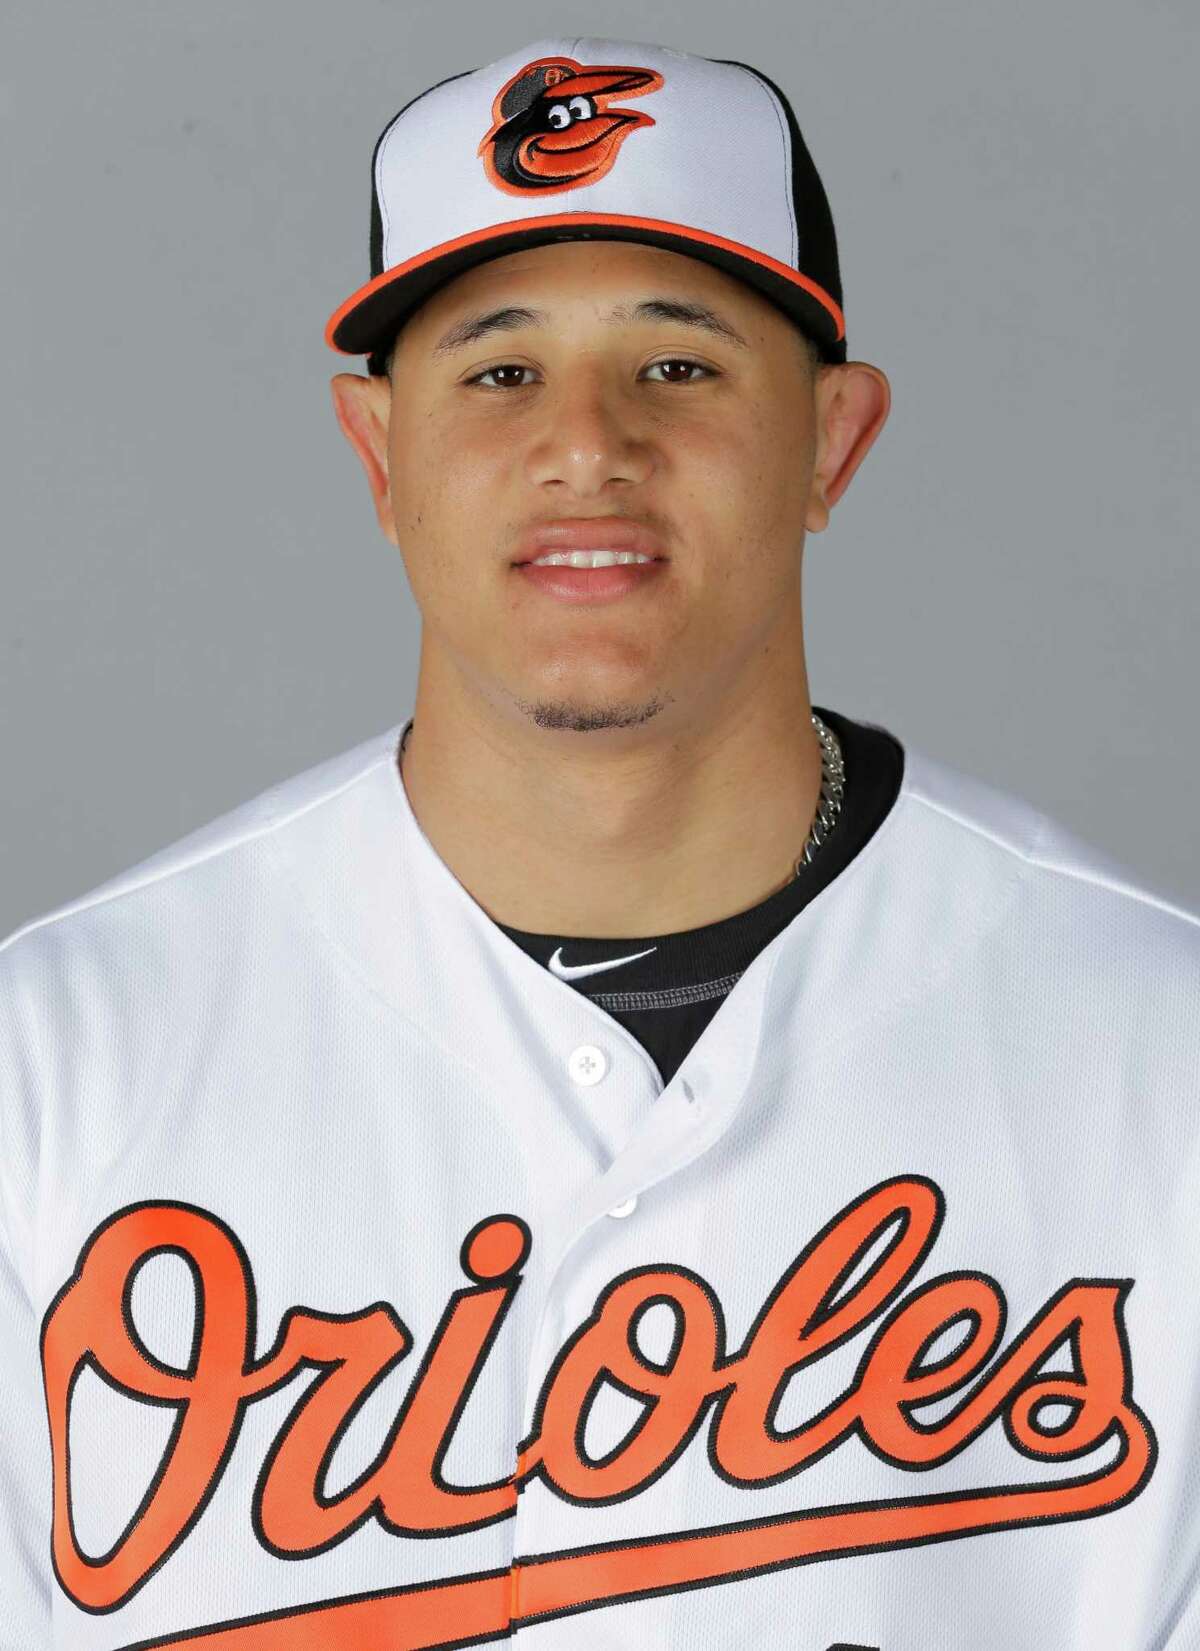 Yankees pitcher who knows Manny Machado from high school and